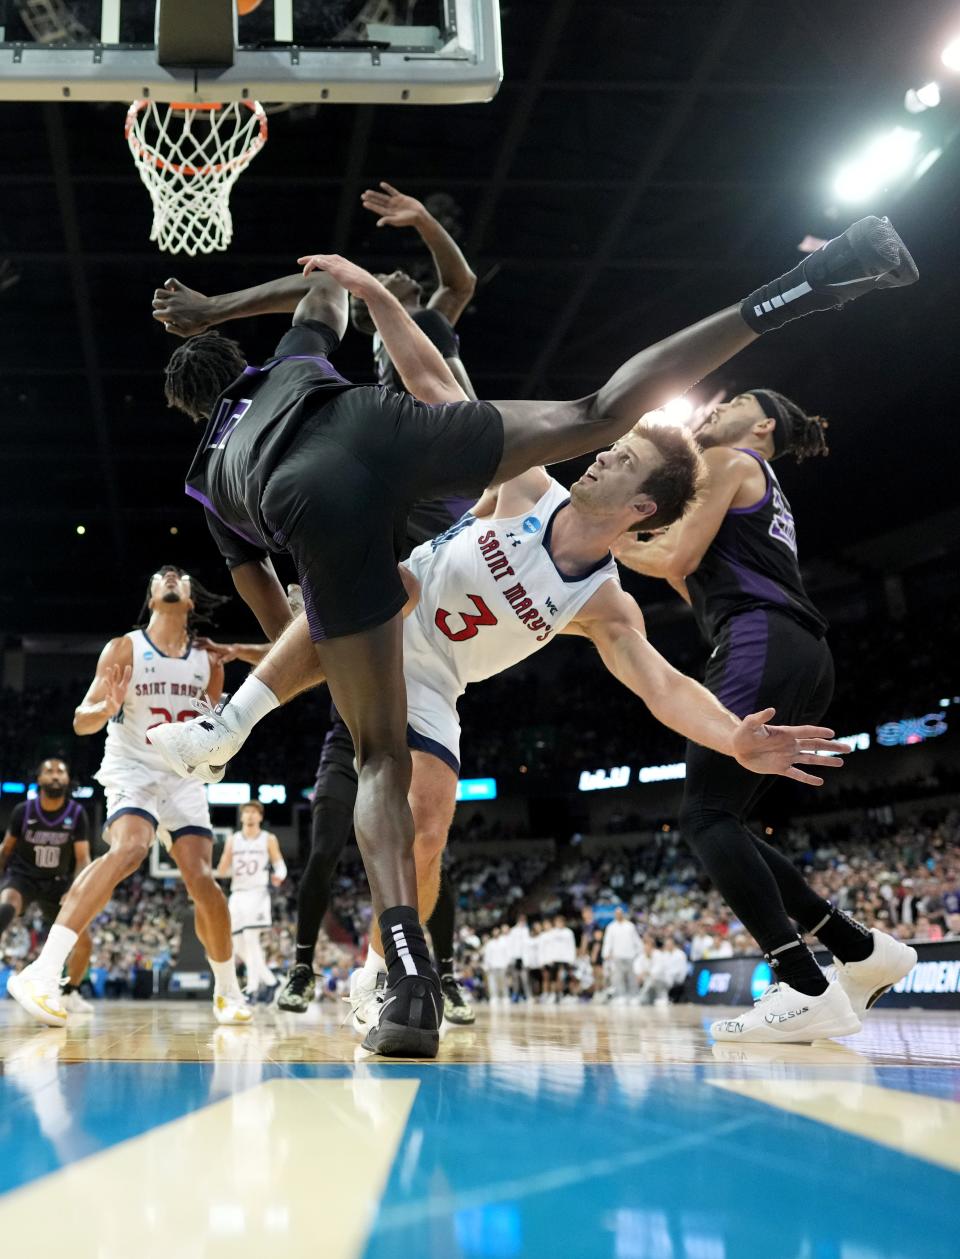 Mar 22, 2024; Spokane, WA, USA; Grand Canyon Antelopes forward Lok Wur (5) and St. Mary's Gaels guard Augustas Marciulionis (3) fight for a rebound during the second half in the first round of the 2024 NCAA Tournament at Spokane Veterans Memorial Arena. Mandatory Credit: Kirby Lee-USA TODAY Sports